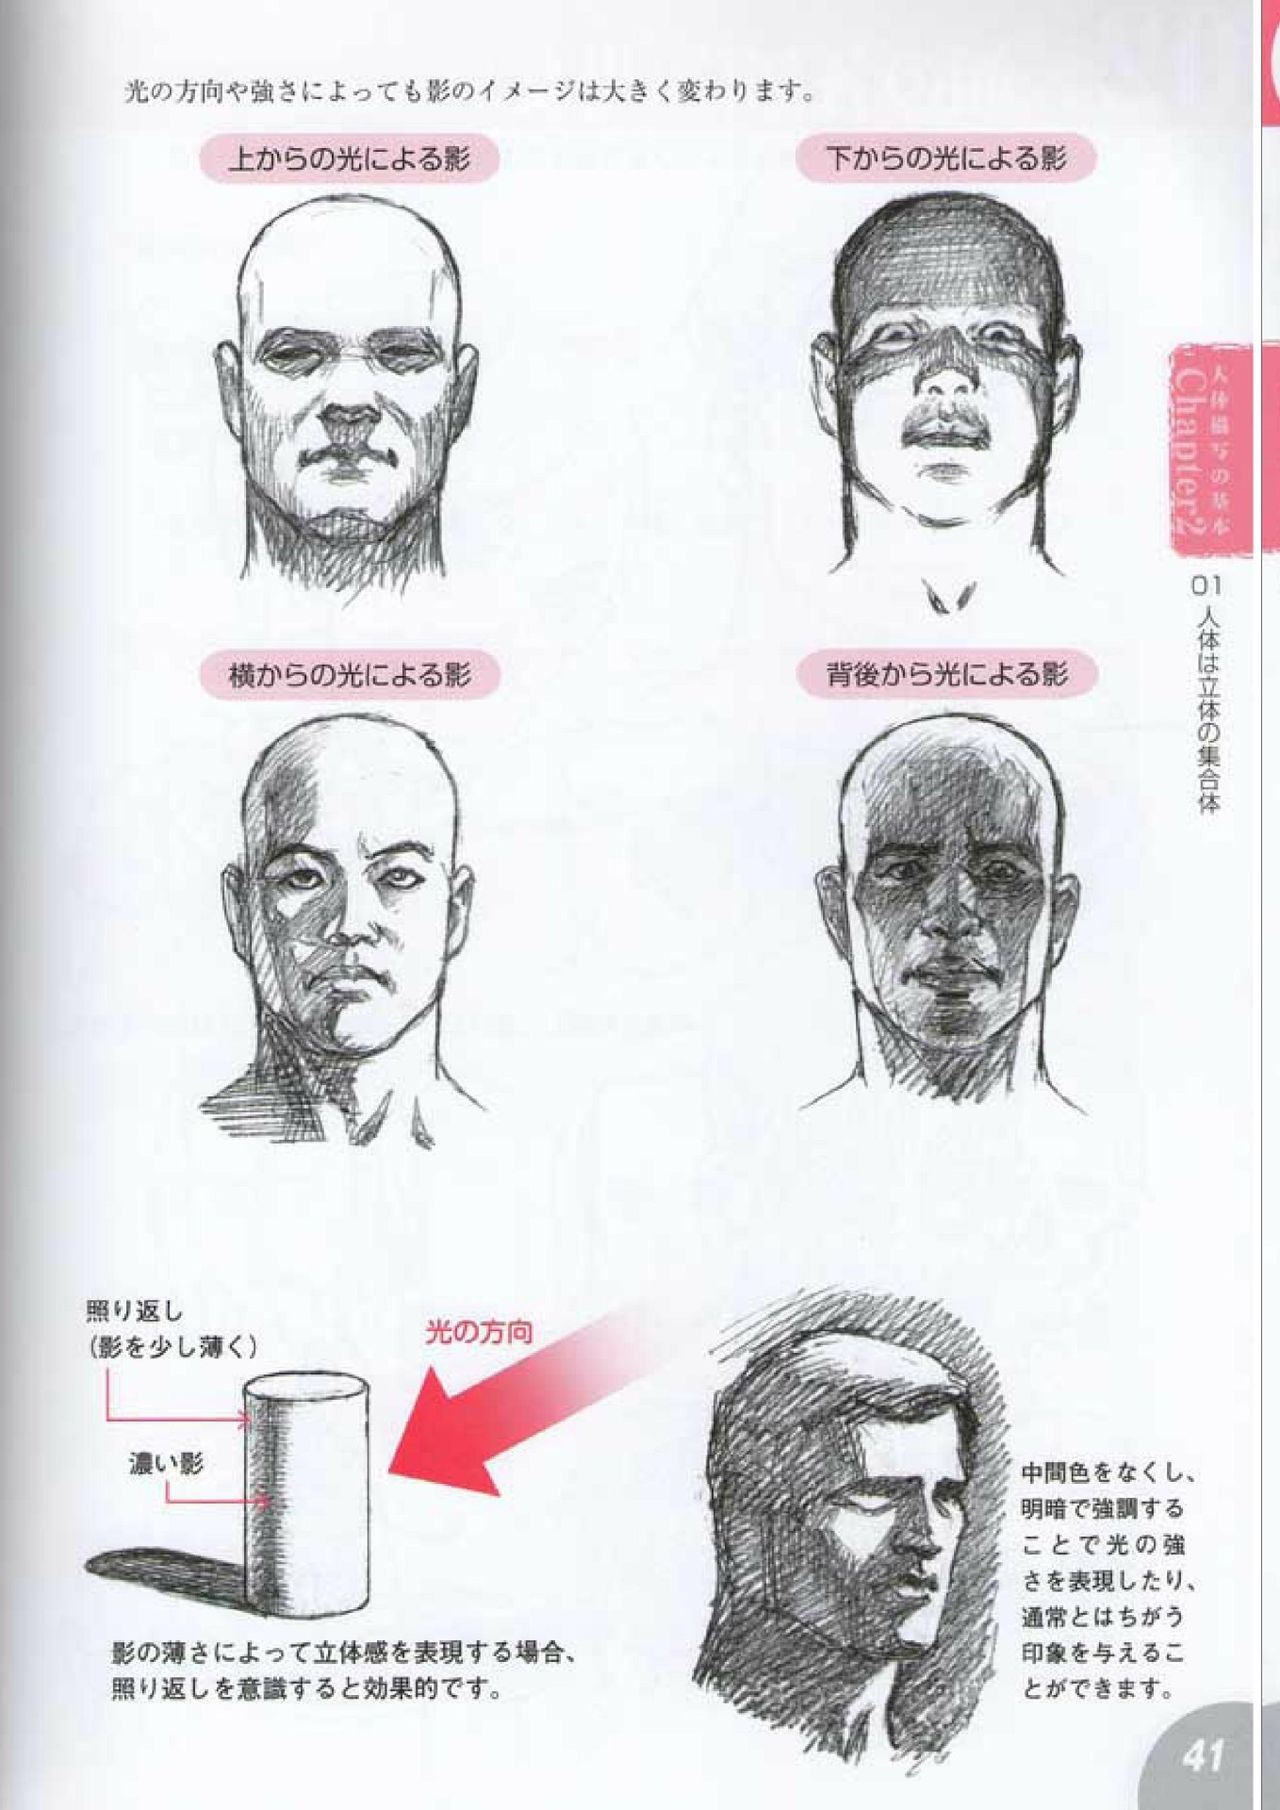 How to draw a character drawing from a human anatomical chart 39